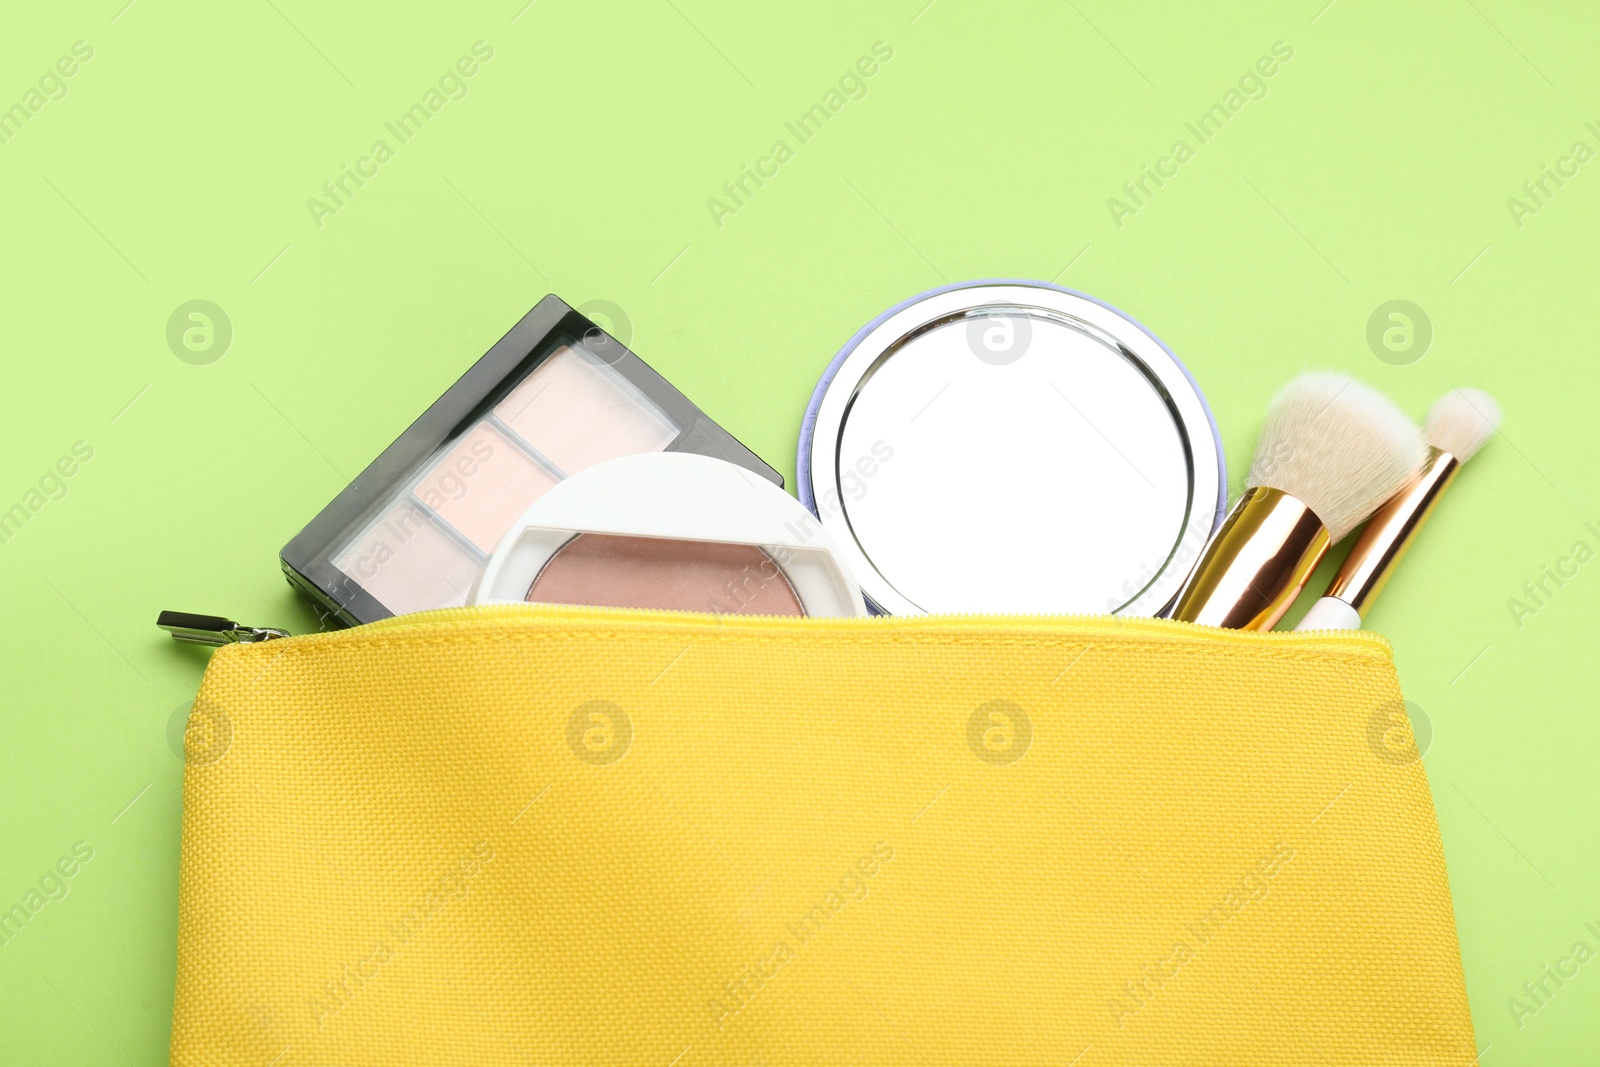 Photo of Cosmetic bag with pocket mirror and makeup products on light green background, flat lay